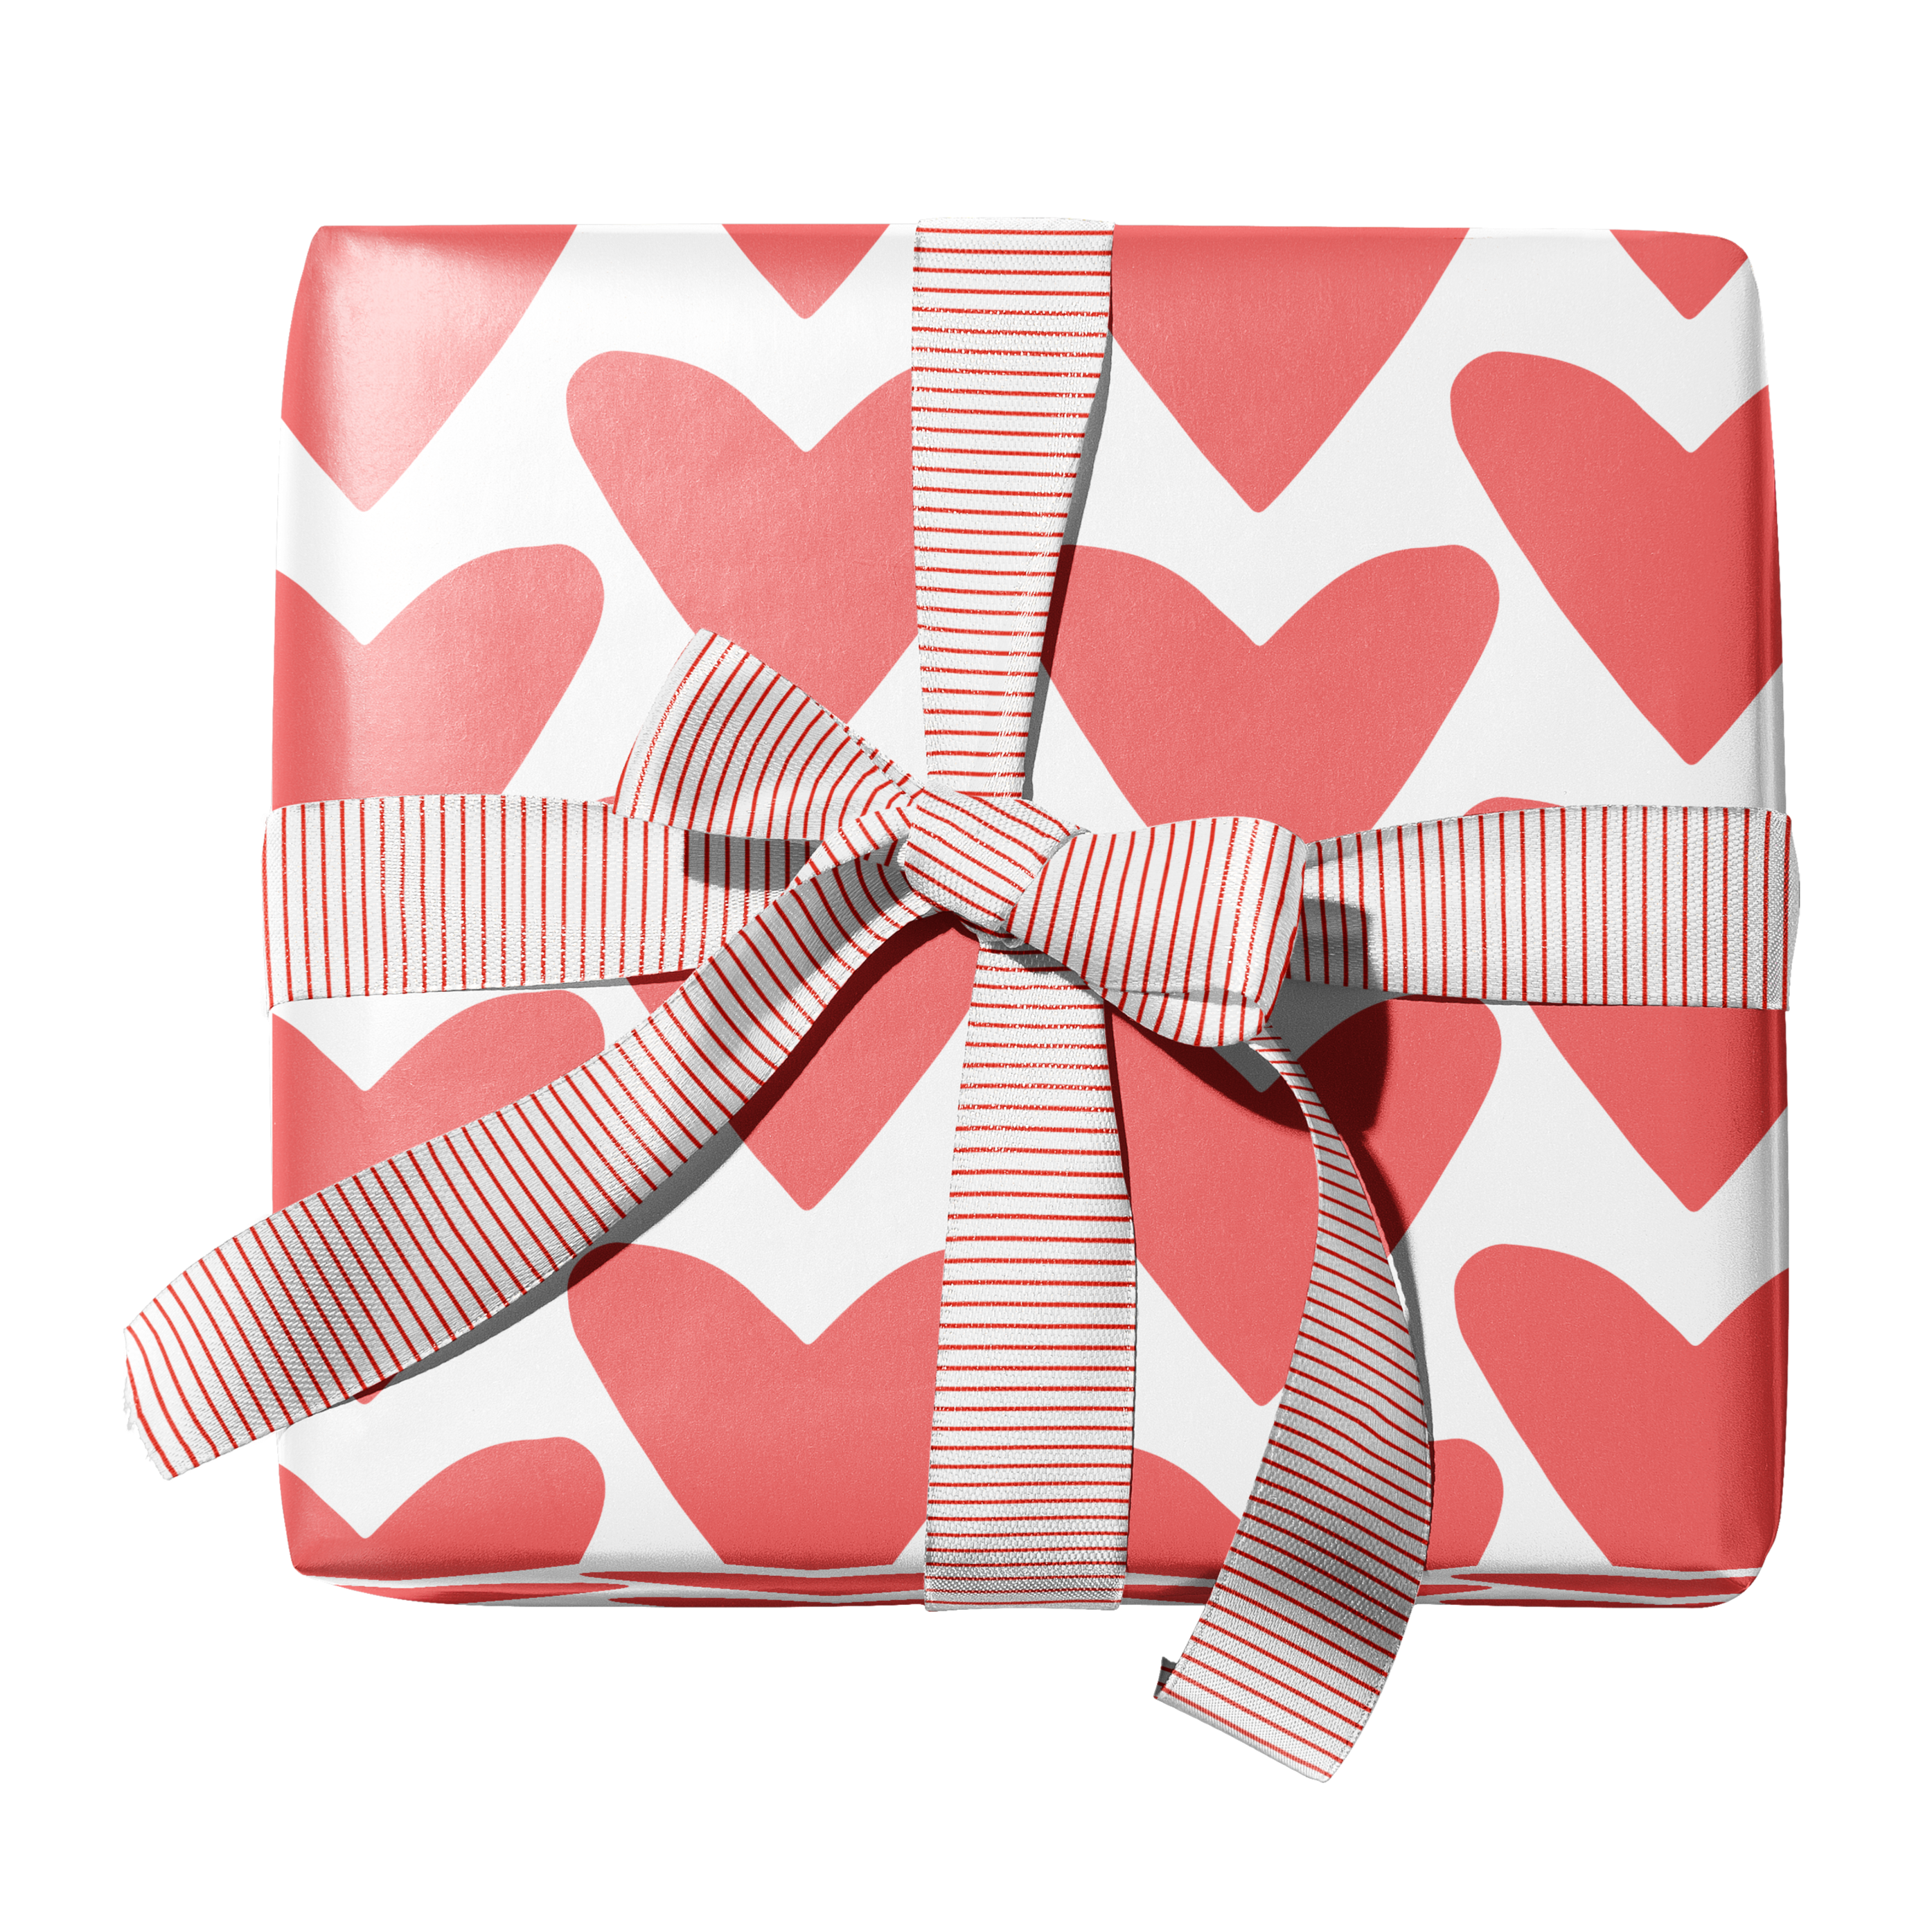 Paper Bow Gift Topper - Gift Wrapping Love